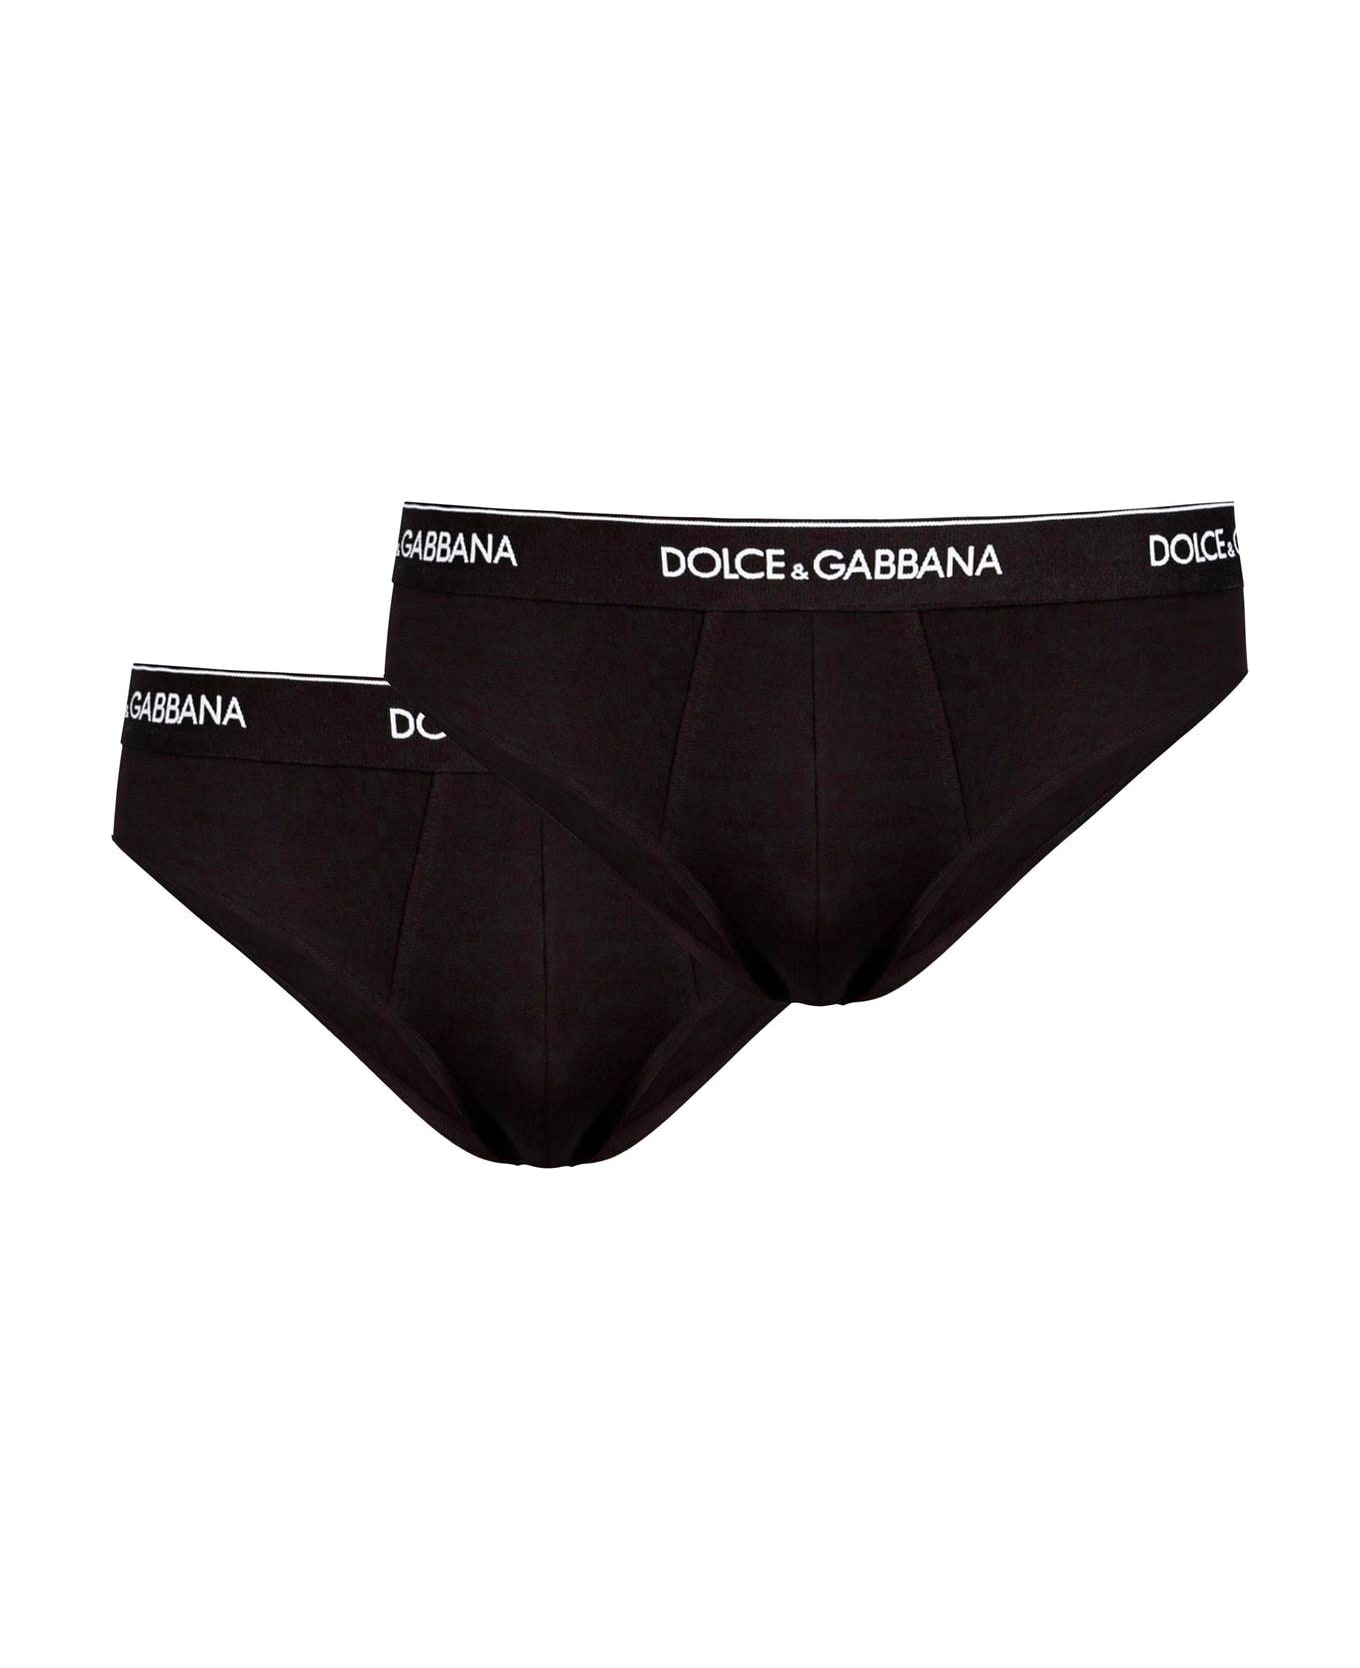 Dolce & Gabbana Cotton Briefs With Logoed Elastic Band - Black ショーツ